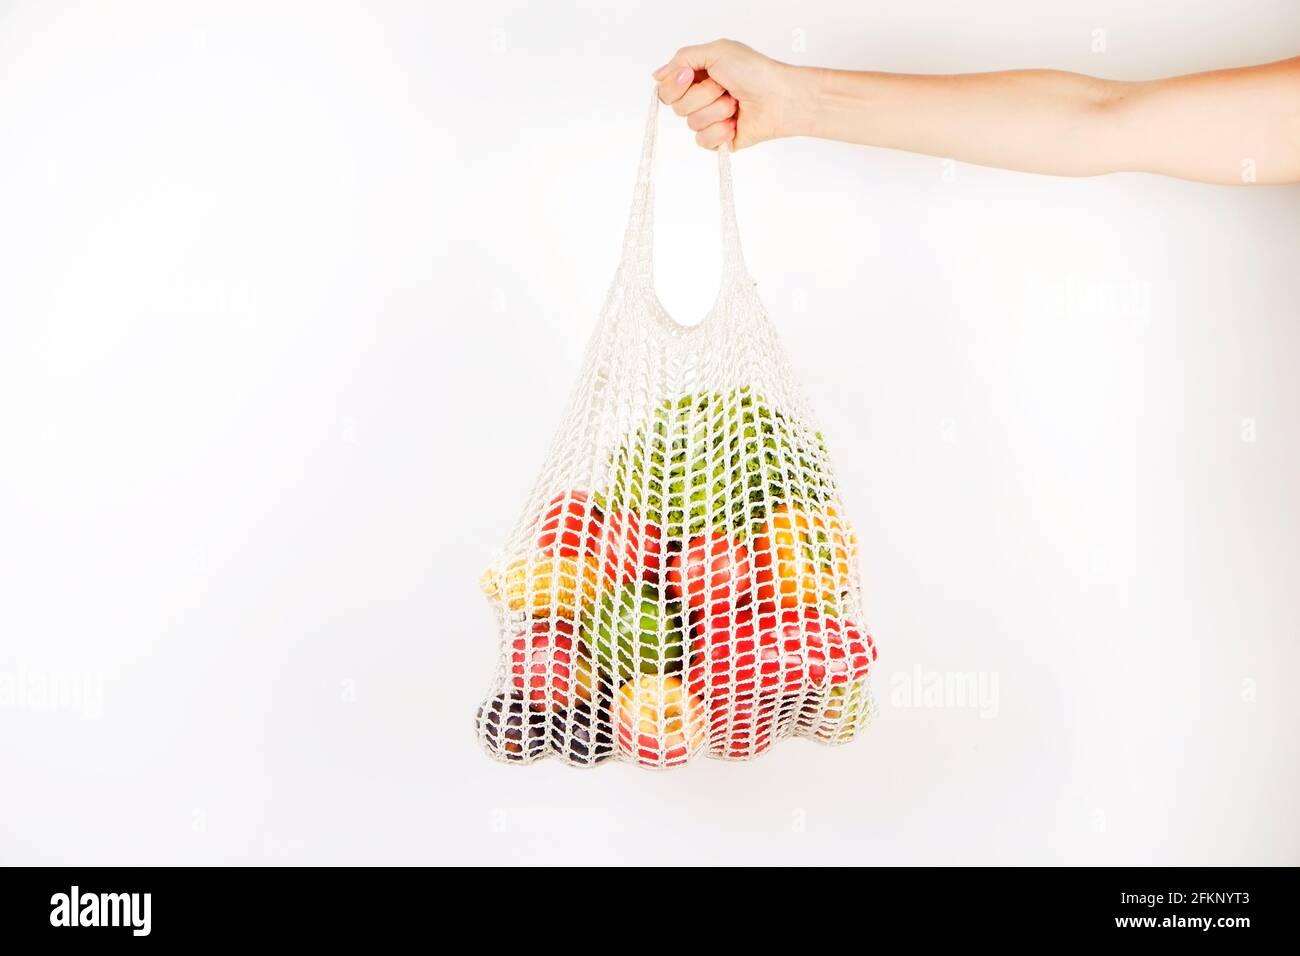 Woman With Salad Bag And A Lettuce High Resolution Stock Photography and  Images - Alamy